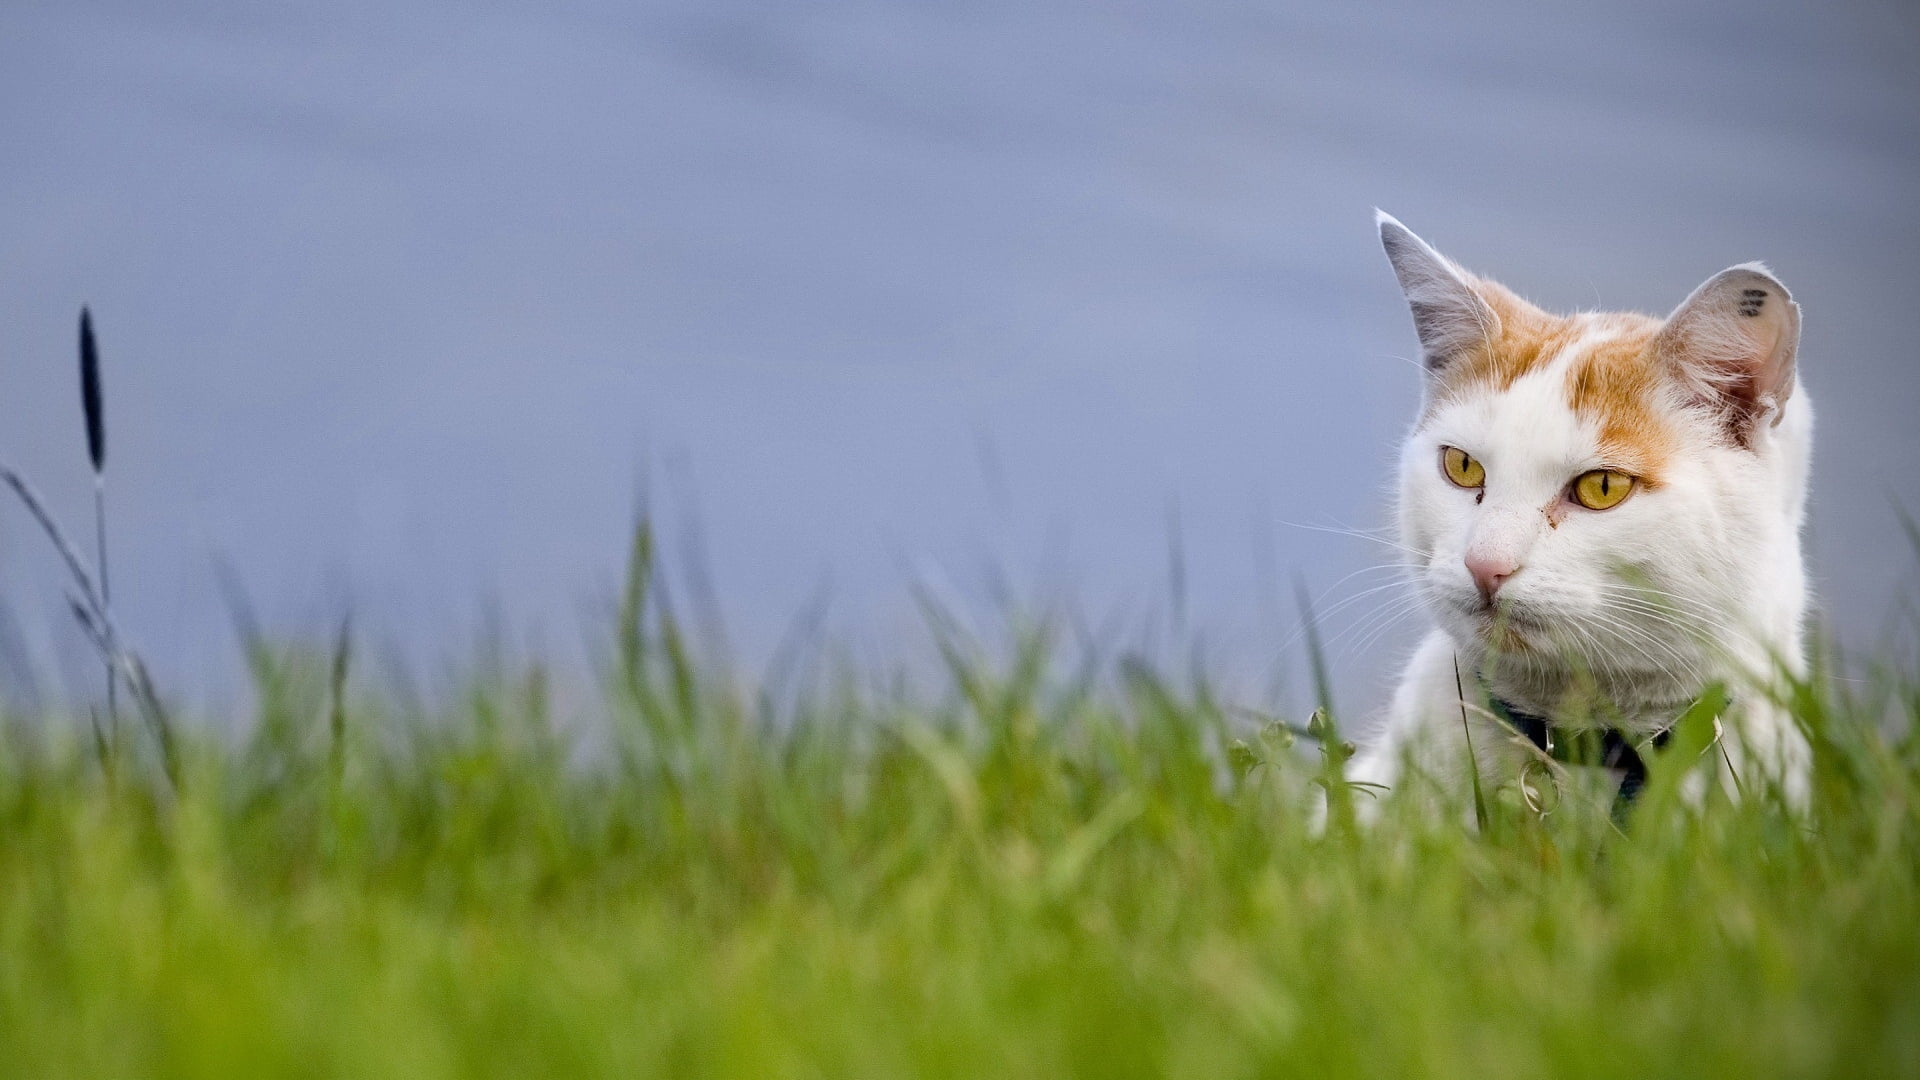 White and orange cat on green grass field during daytime HD ...